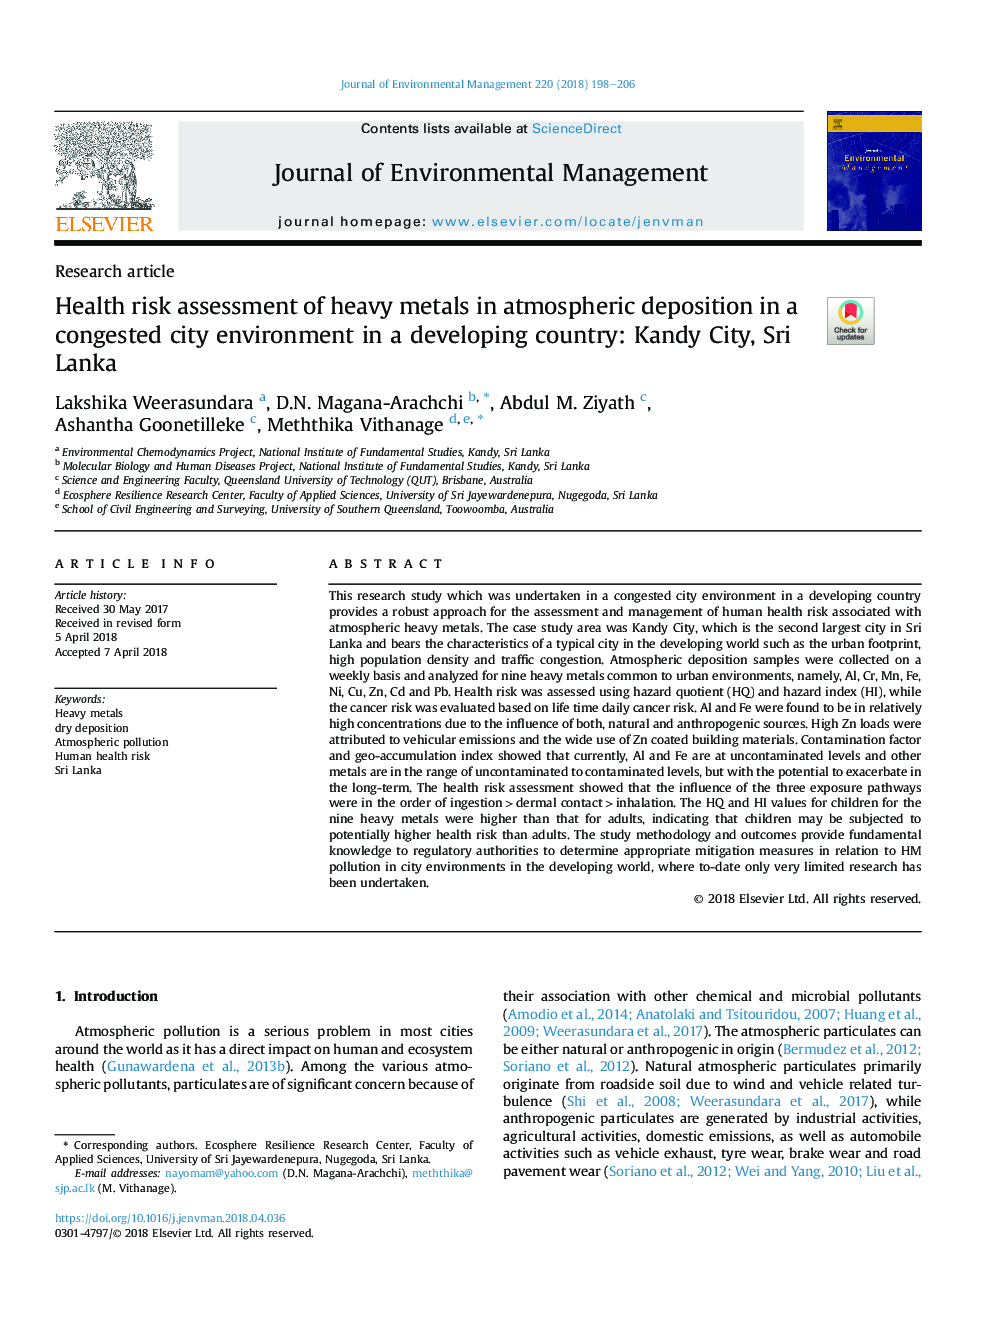 Health risk assessment of heavy metals in atmospheric deposition in a congested city environment in a developing country: Kandy City, Sri Lanka